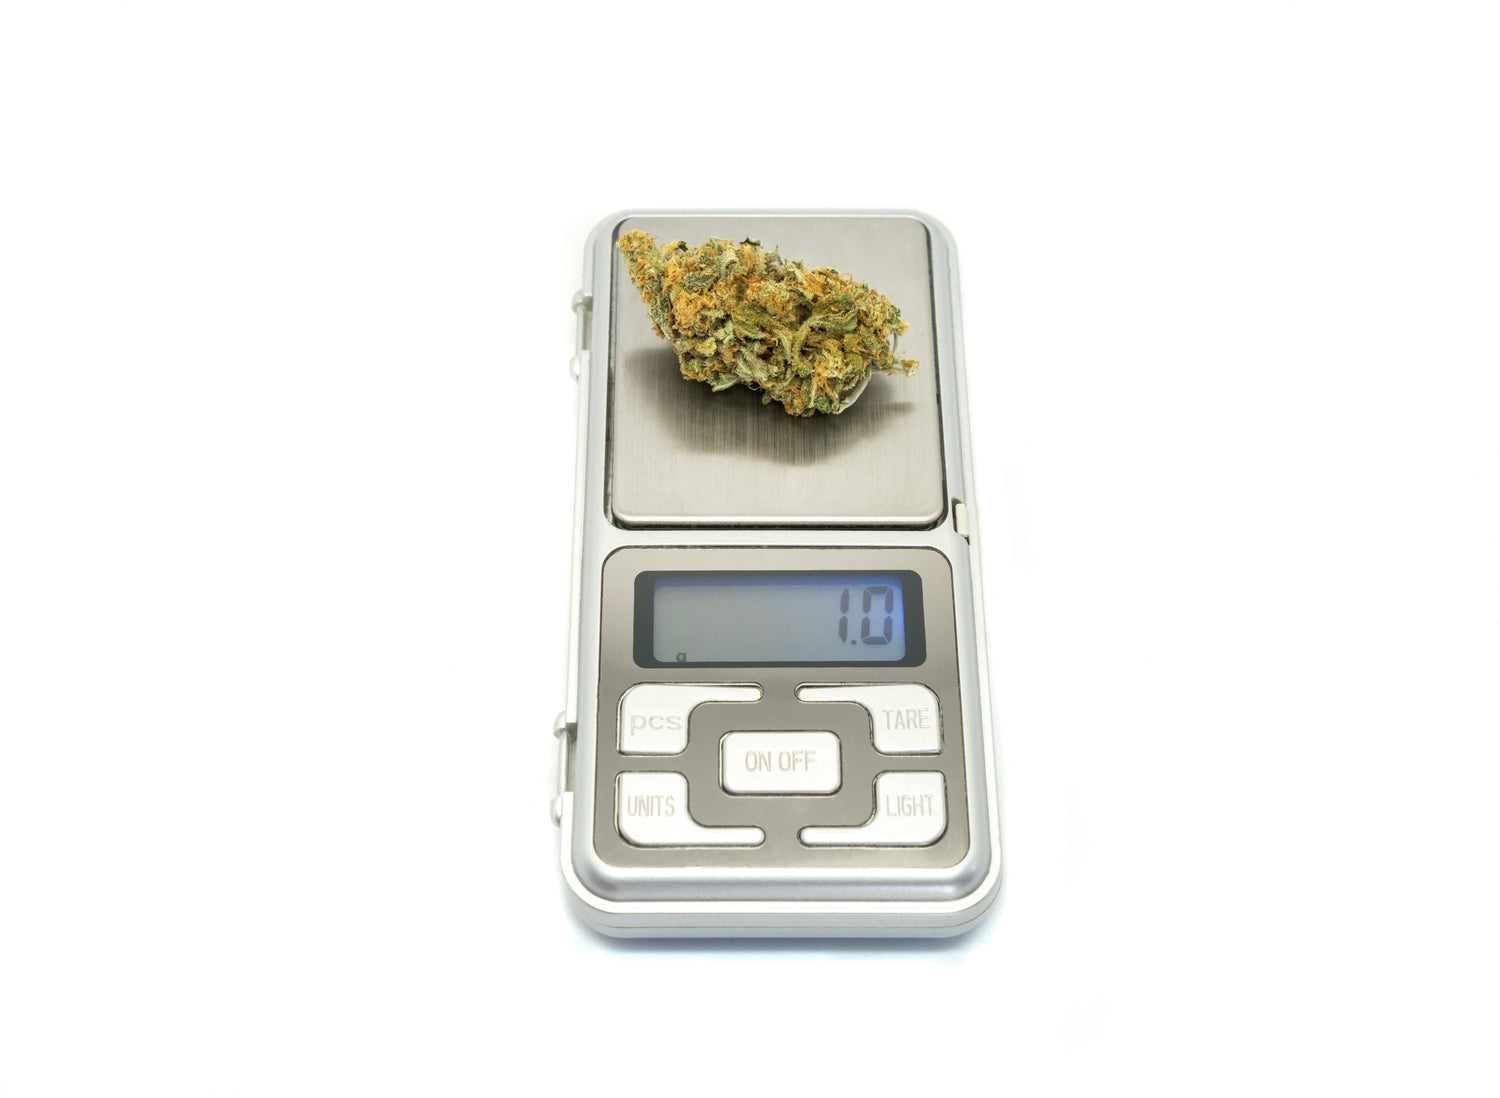 How Many Grams Are In An Ounce of Weed